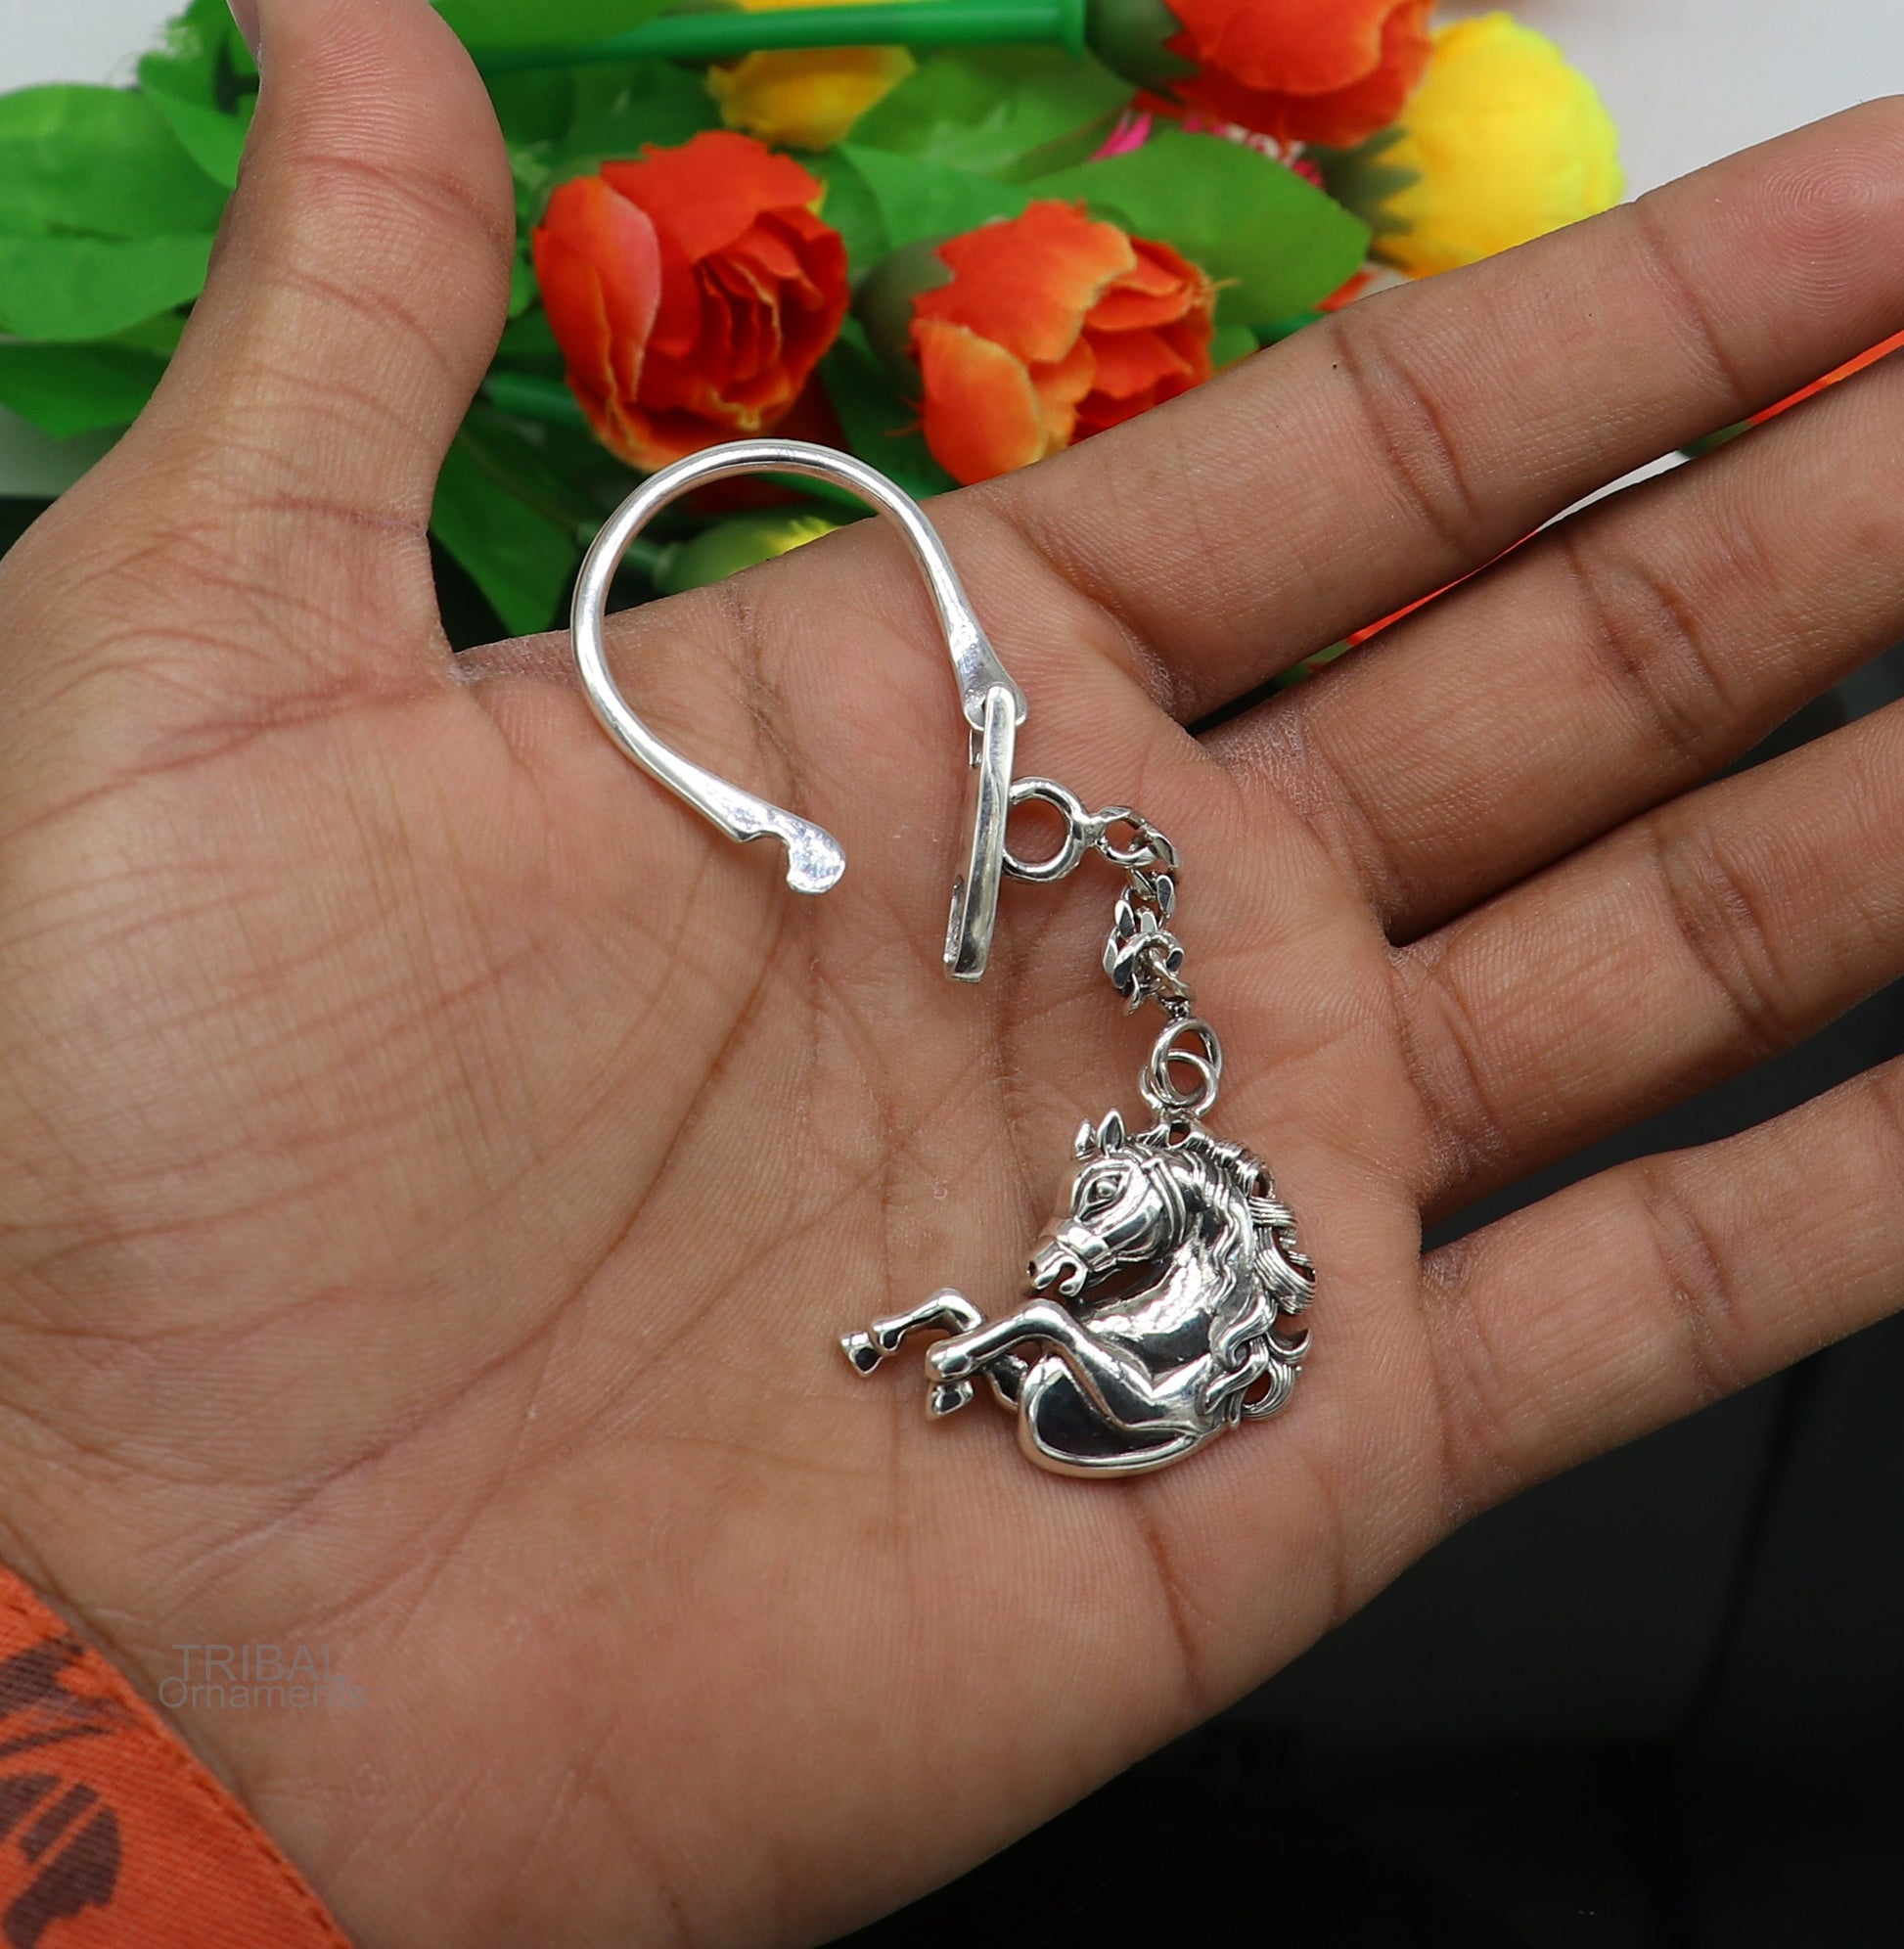 925 Sterling silver handmade unique unicorn horse design solid key chian, stylish royal gifting silver accessories unisex gift jewelry kch05 - TRIBAL ORNAMENTS